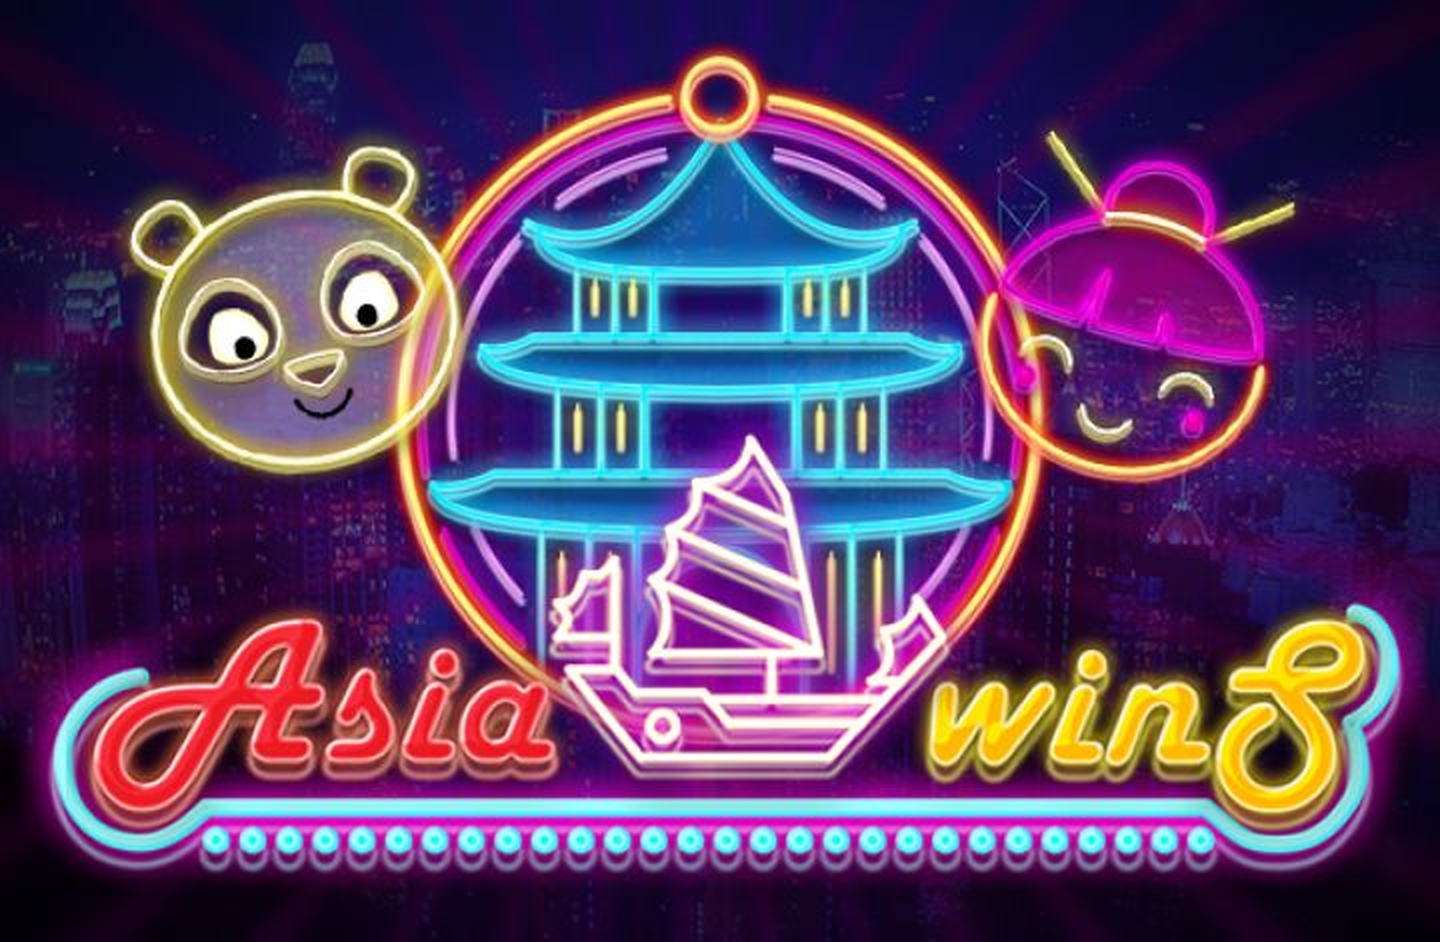 The Asia Wins Online Slot Demo Game by Booming Games